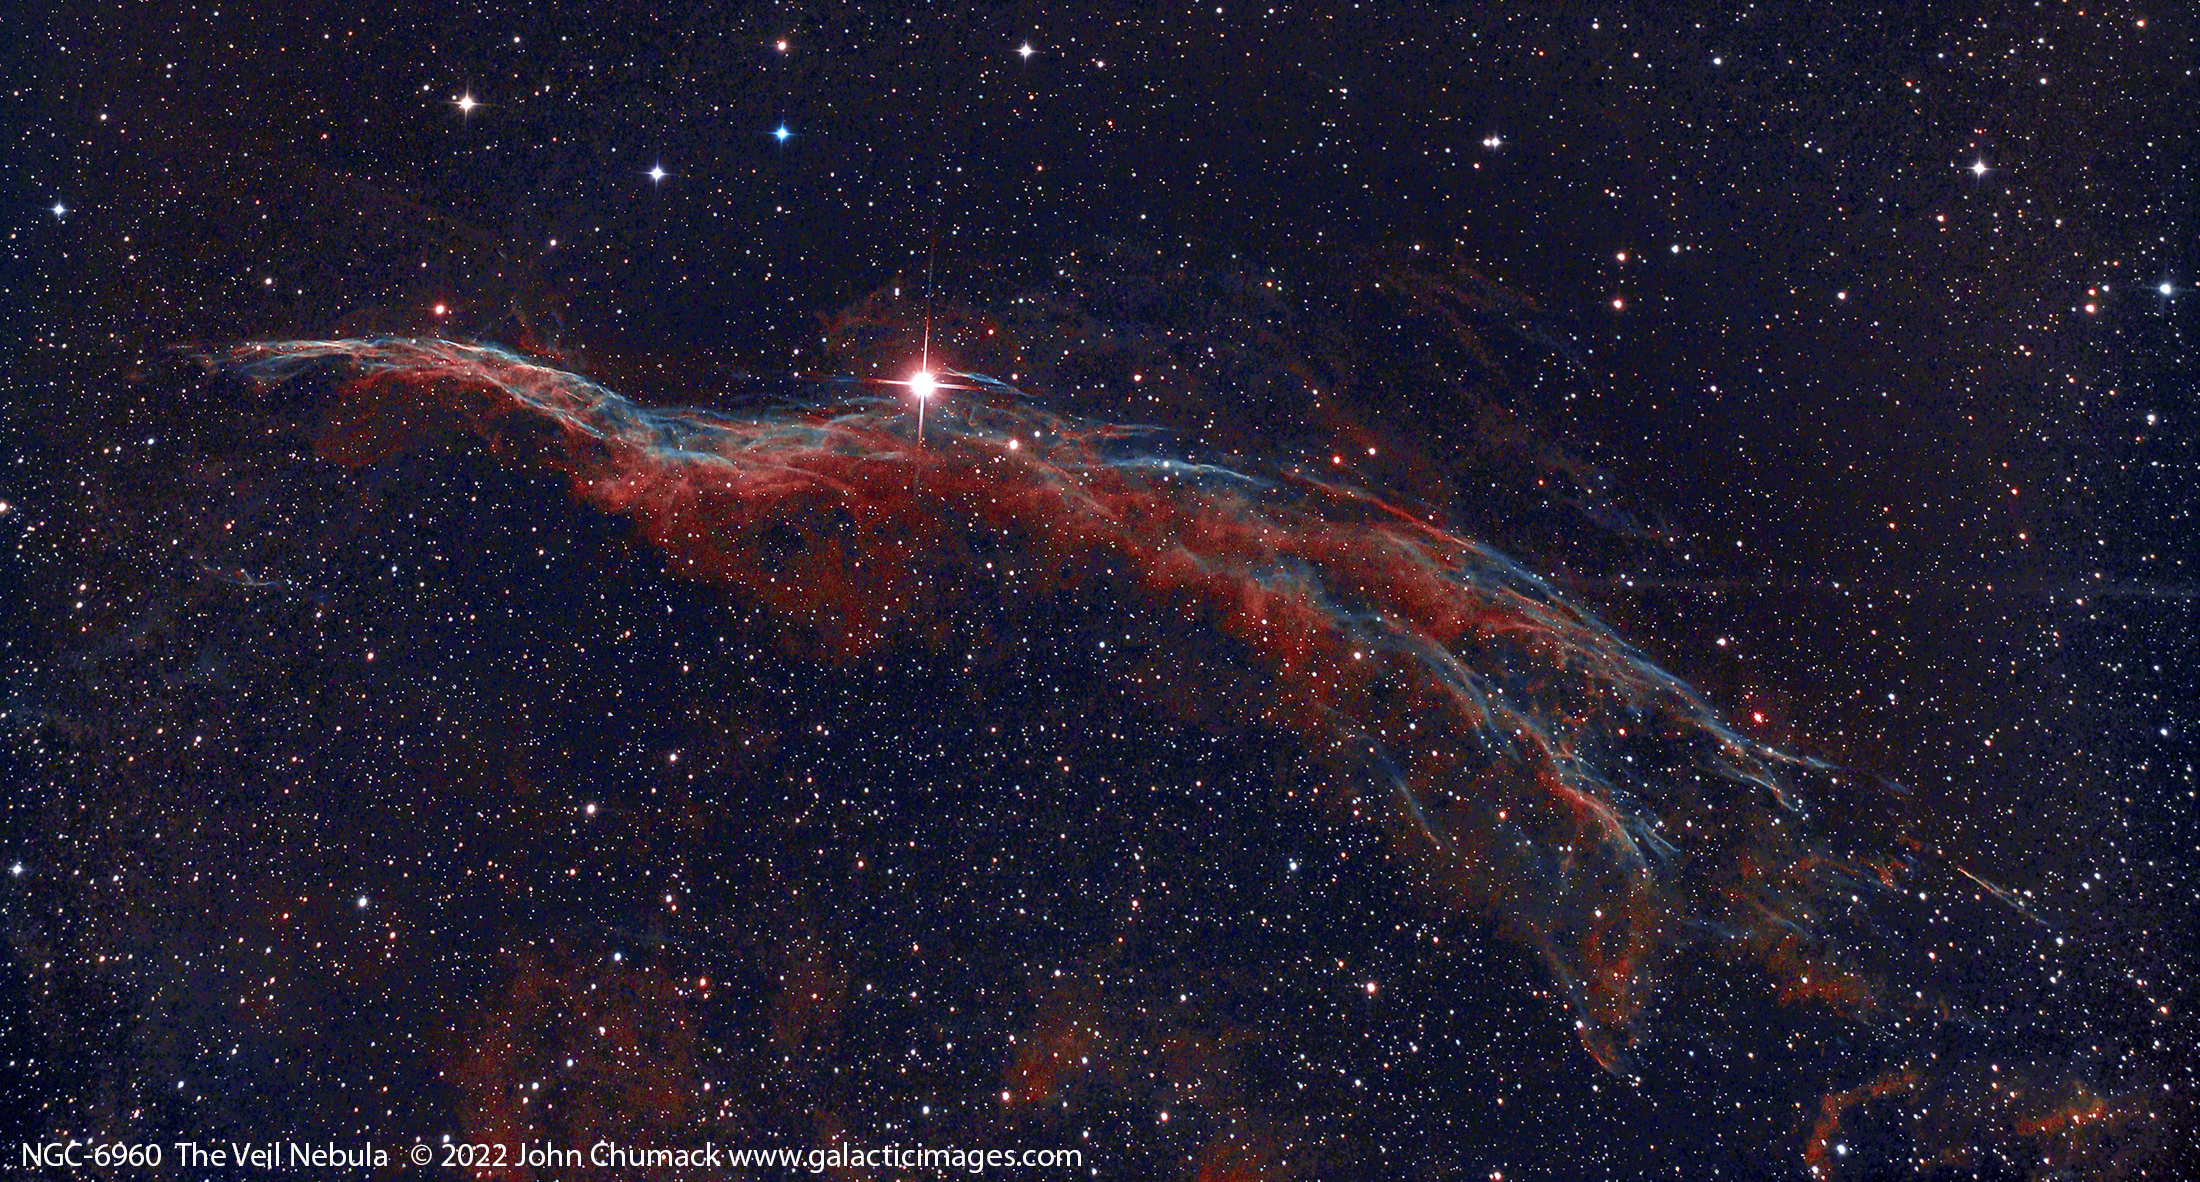 The Witches Broom, the Veil Nebula, Supernova remnant